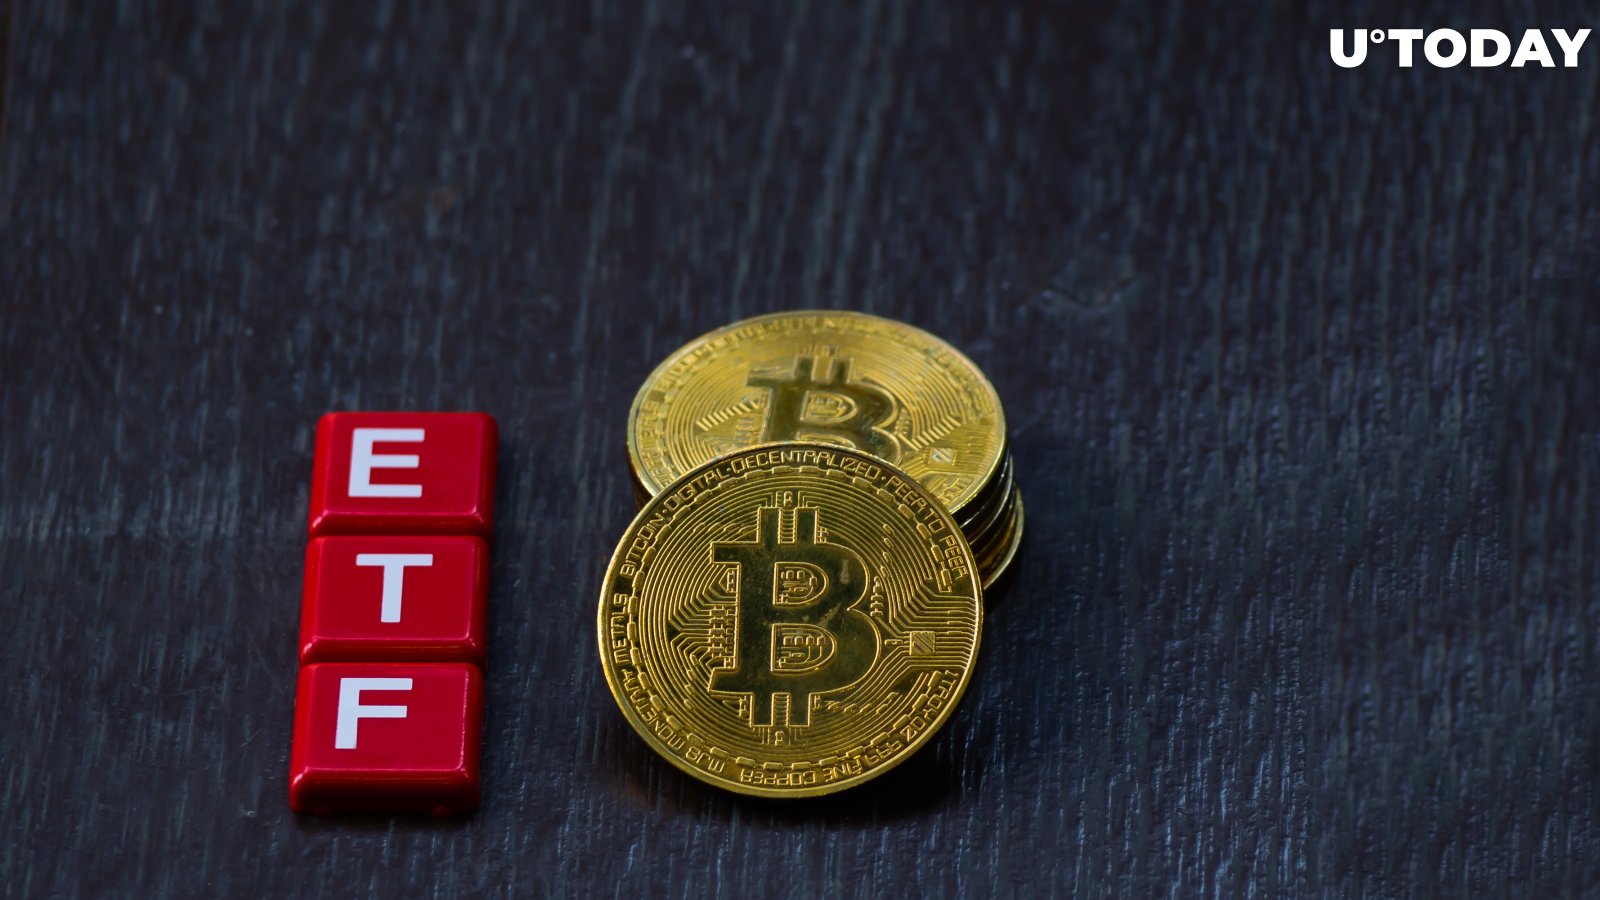 Bitcoin ETF Could Be Approved Next Month, Says Bloomberg’s Mike McGlone